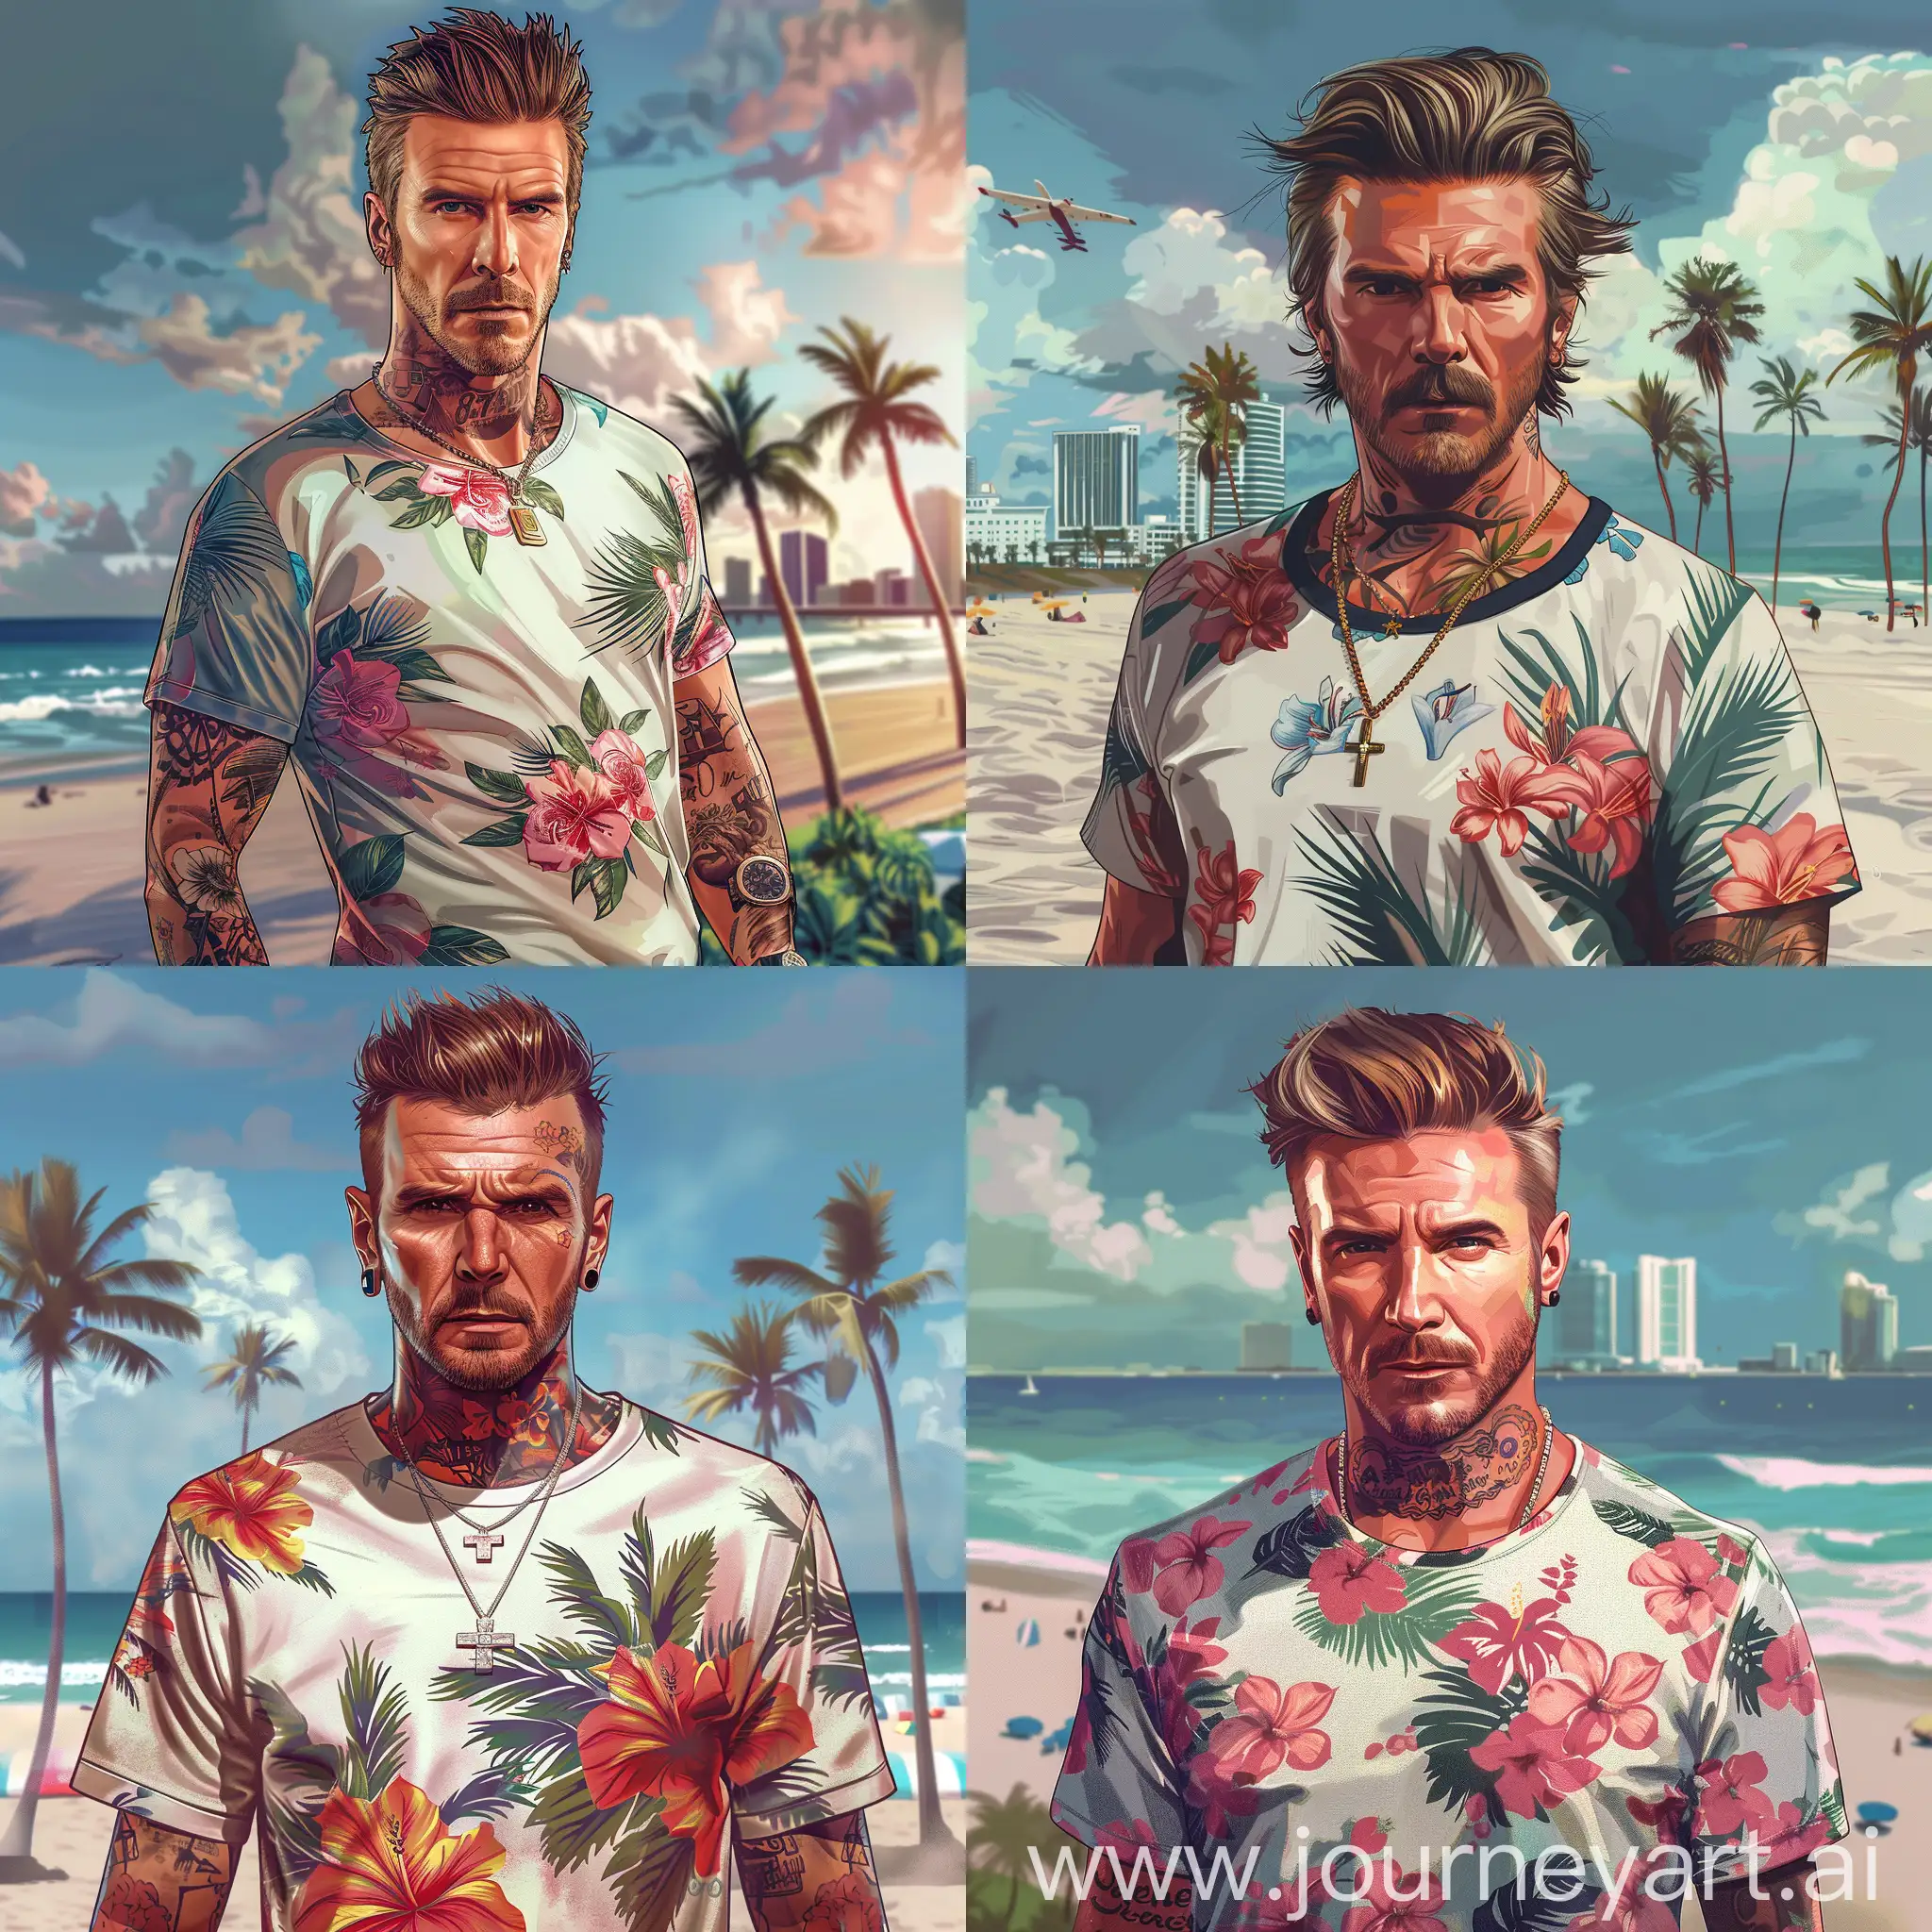 
 Jason in GTA style, portrayed by David Beckham
English former footballer, wear floral tshirt, Miami beach background, in the style of a Grand Theft Auto loading screen, full character height portrait, GTA style artwork, highly detailed, cel shading, cel art, digital painting style,8k